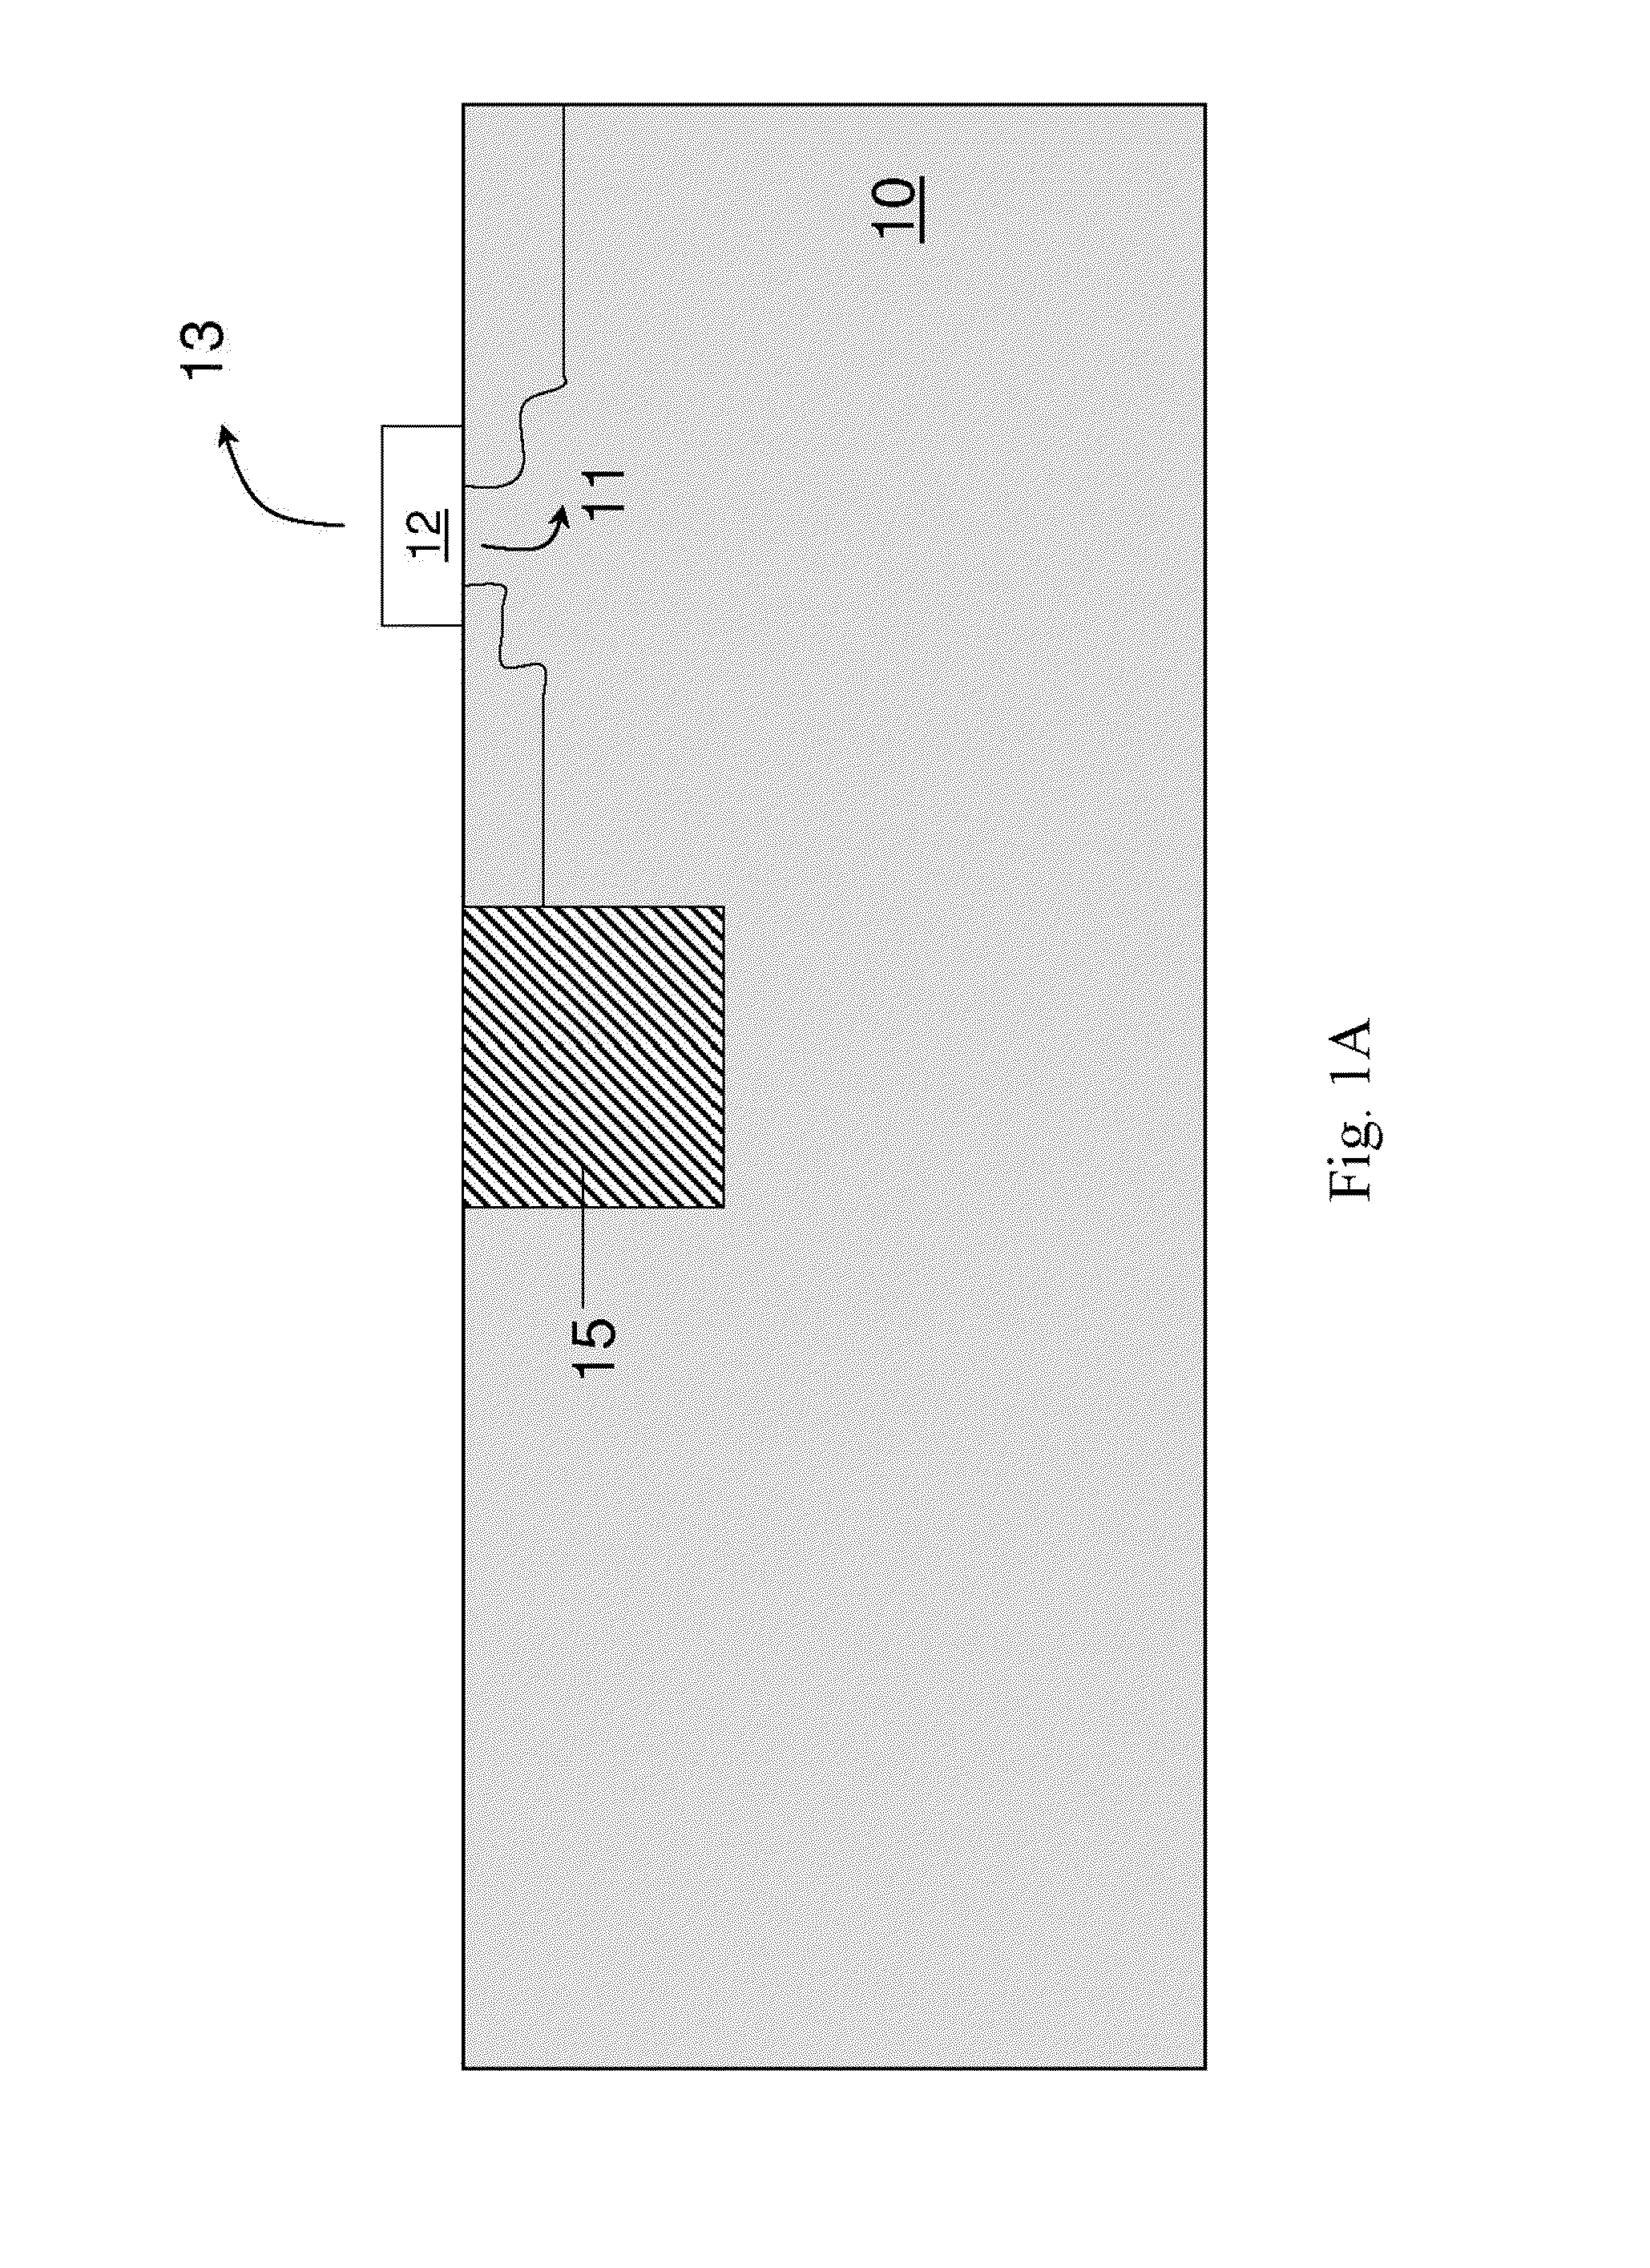 Stacked Integrated Chips and Methods of Fabrication Thereof